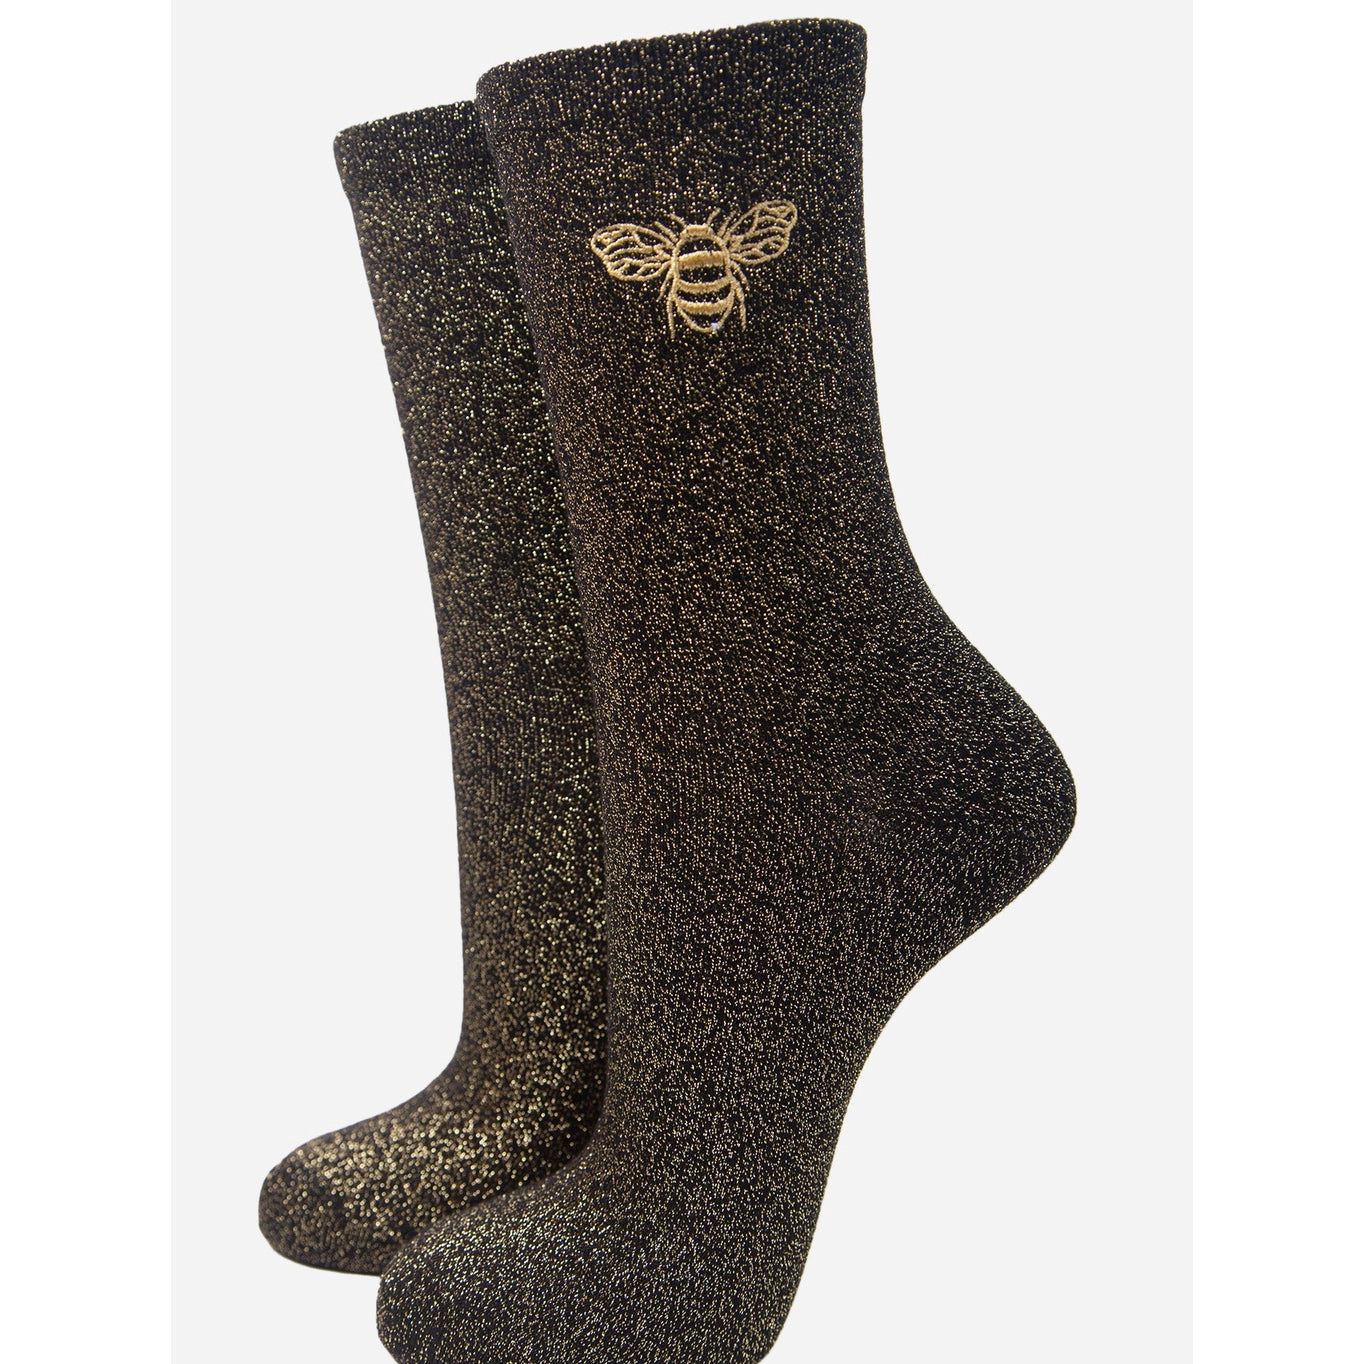 a pair of black socks, with sparkly gold embroidered bee